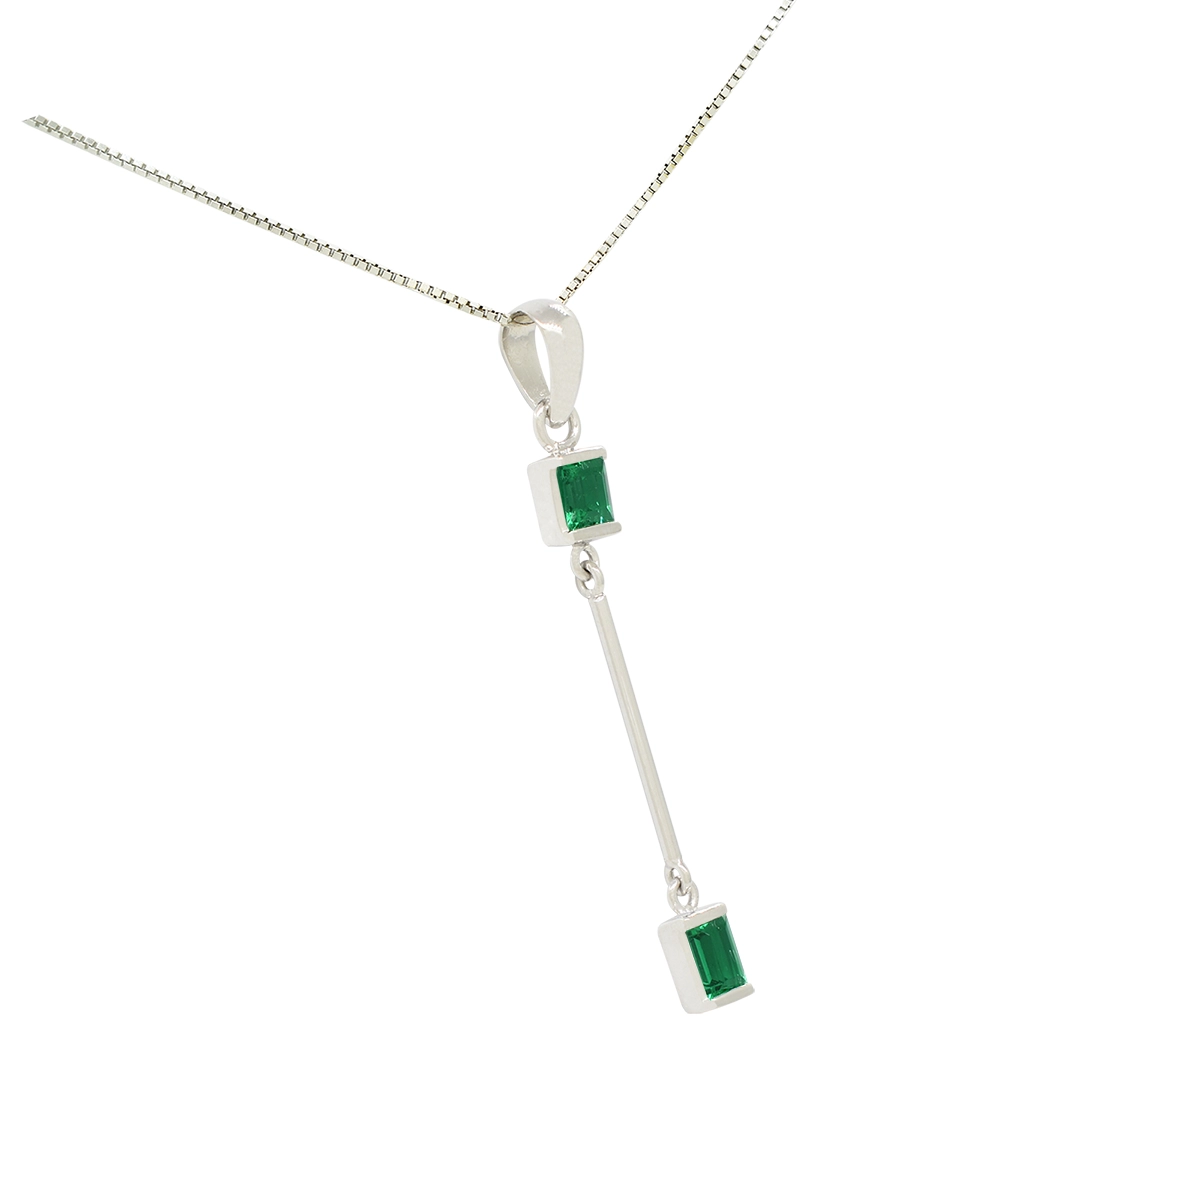 Delicate emerald pendant necklace with a feminine and minimalist style with 2 small rectangular emeralds in excellent quality that show their deep and vivid green color beautifully